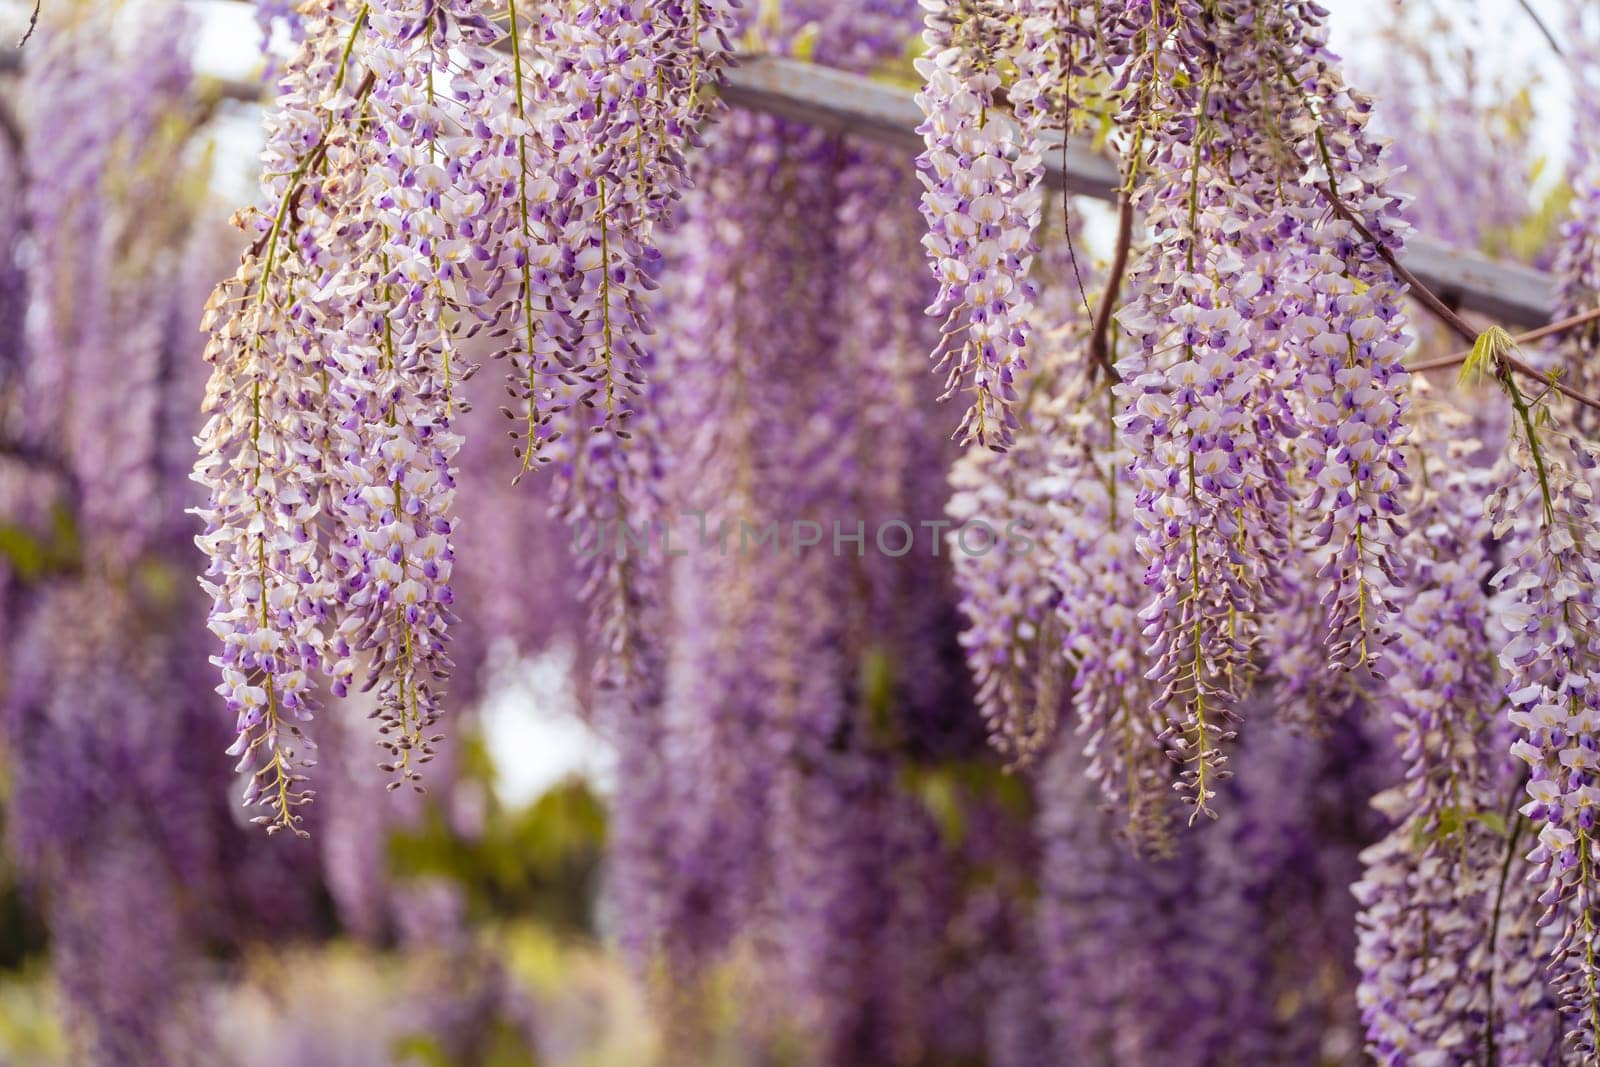 Blooming Wisteria Sinensis with scented classic purple flowersin full bloom in hanging racemes closeup. Garden with wisteria in spring by Matiunina